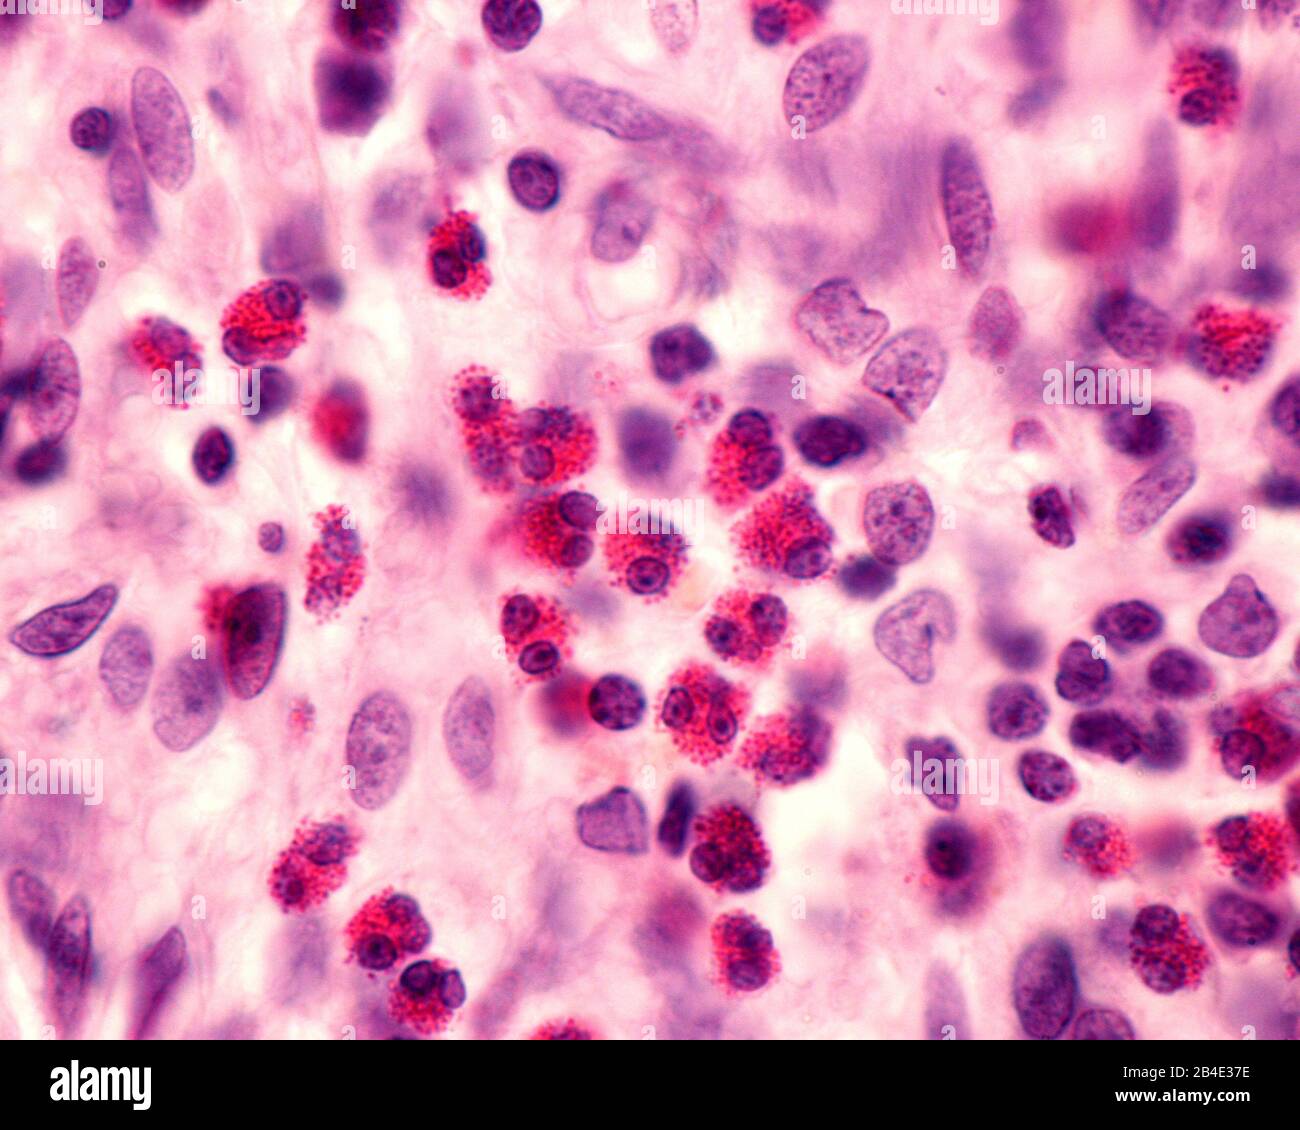 Eosinophil granulocytes in an inflammatory infiltrate. This type of white blood cell is responsible for combating parasites, and have a role in mechan Stock Photo